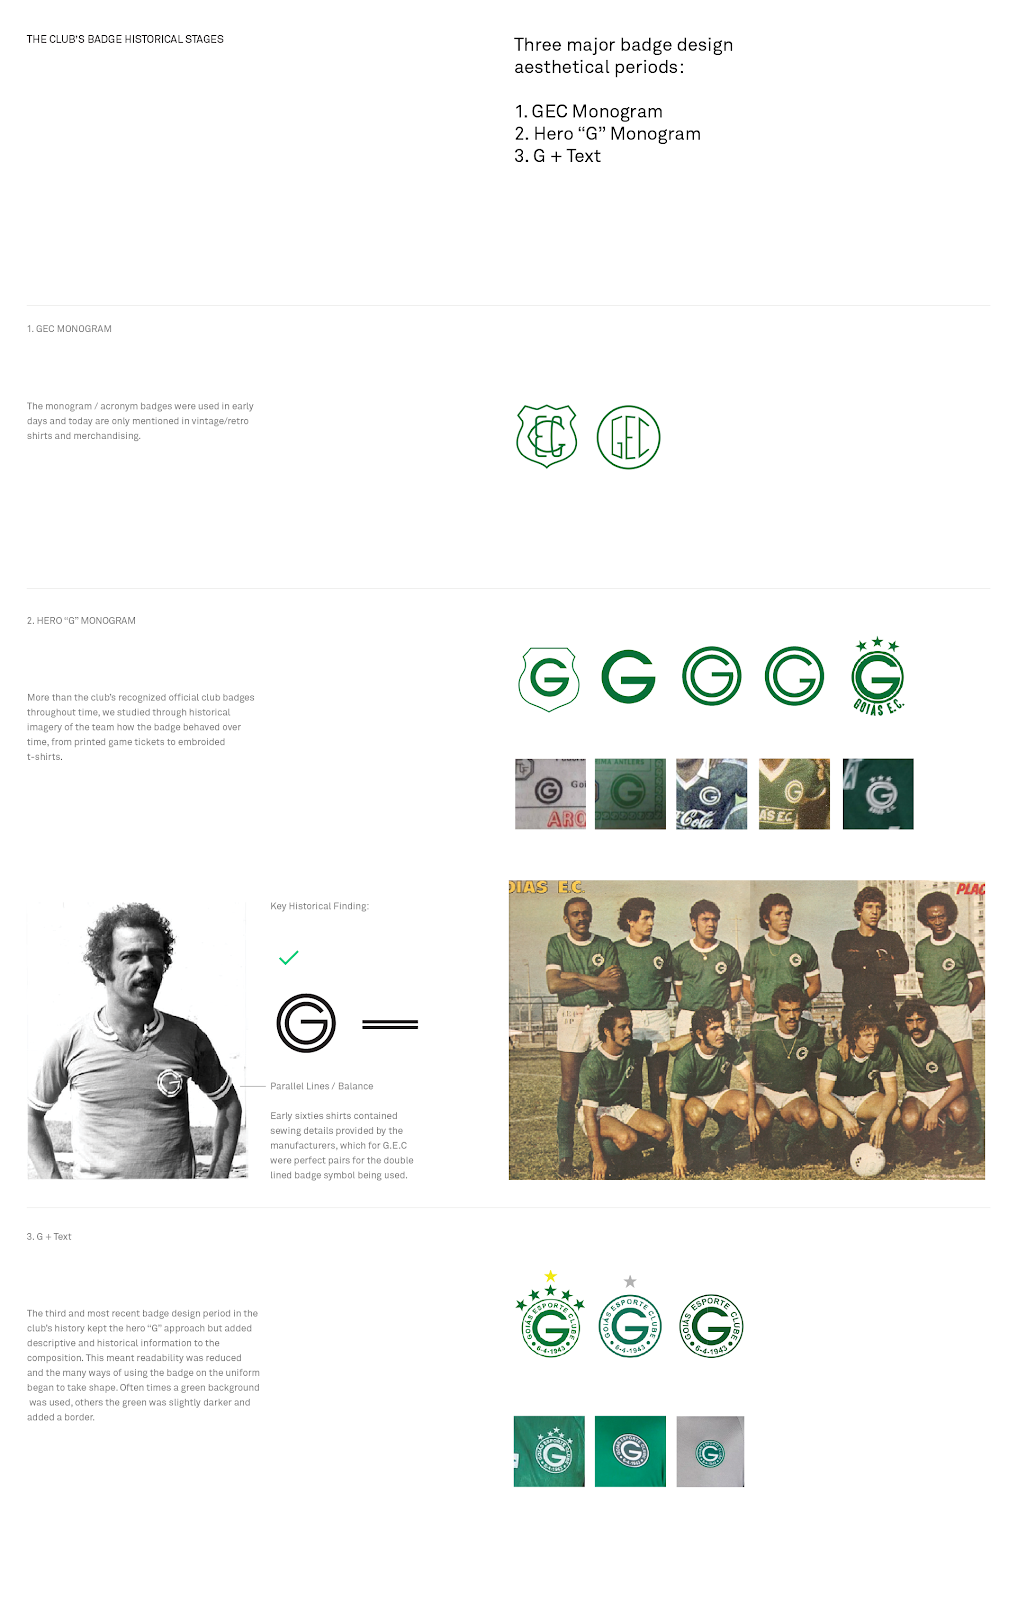 Page from the Brand Identity Manual for the Goias Soccer Team